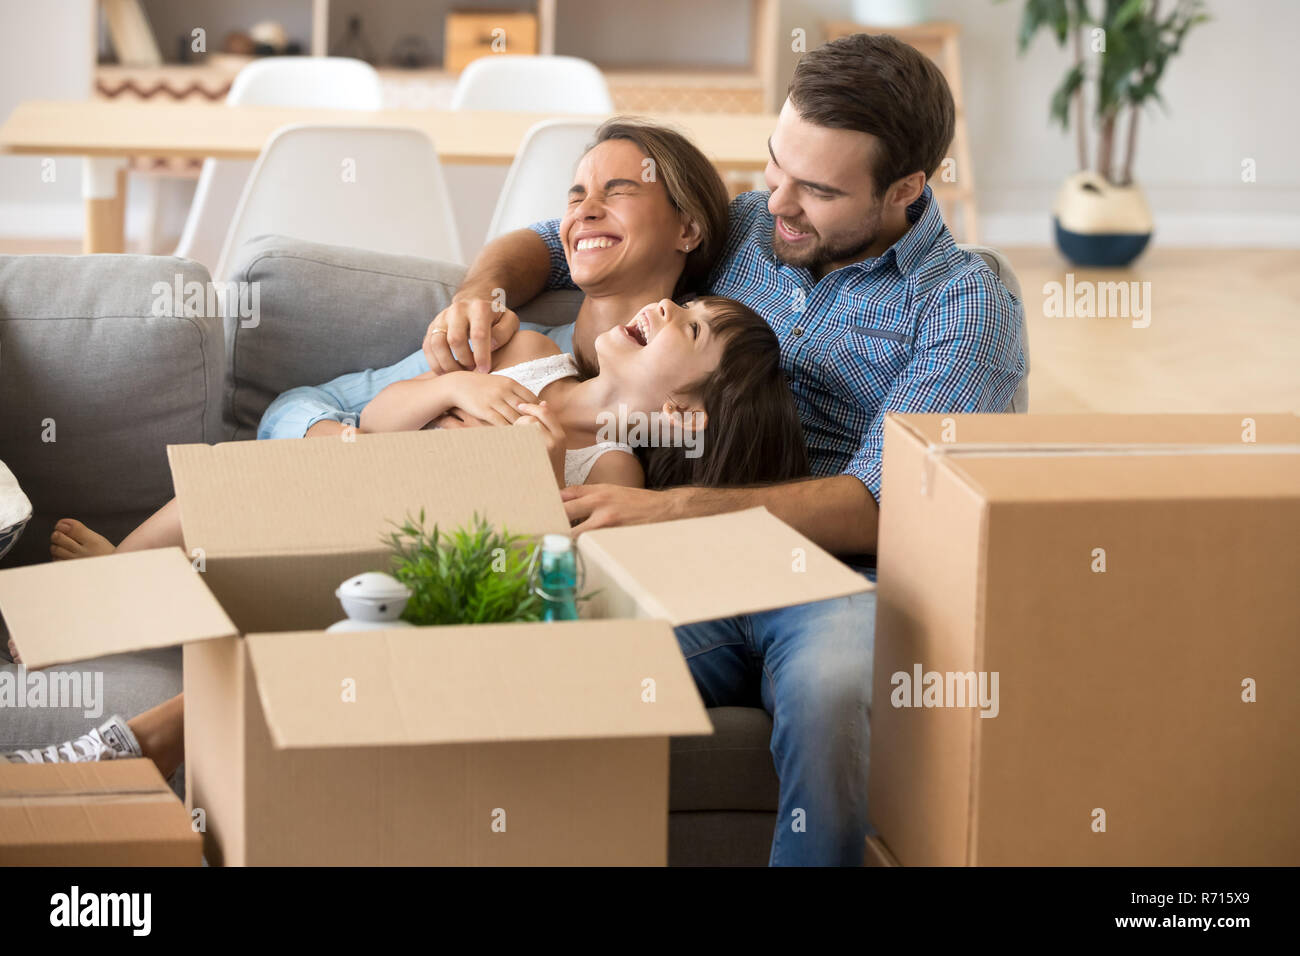 Laughing family spend time having fun at new home  Stock Photo